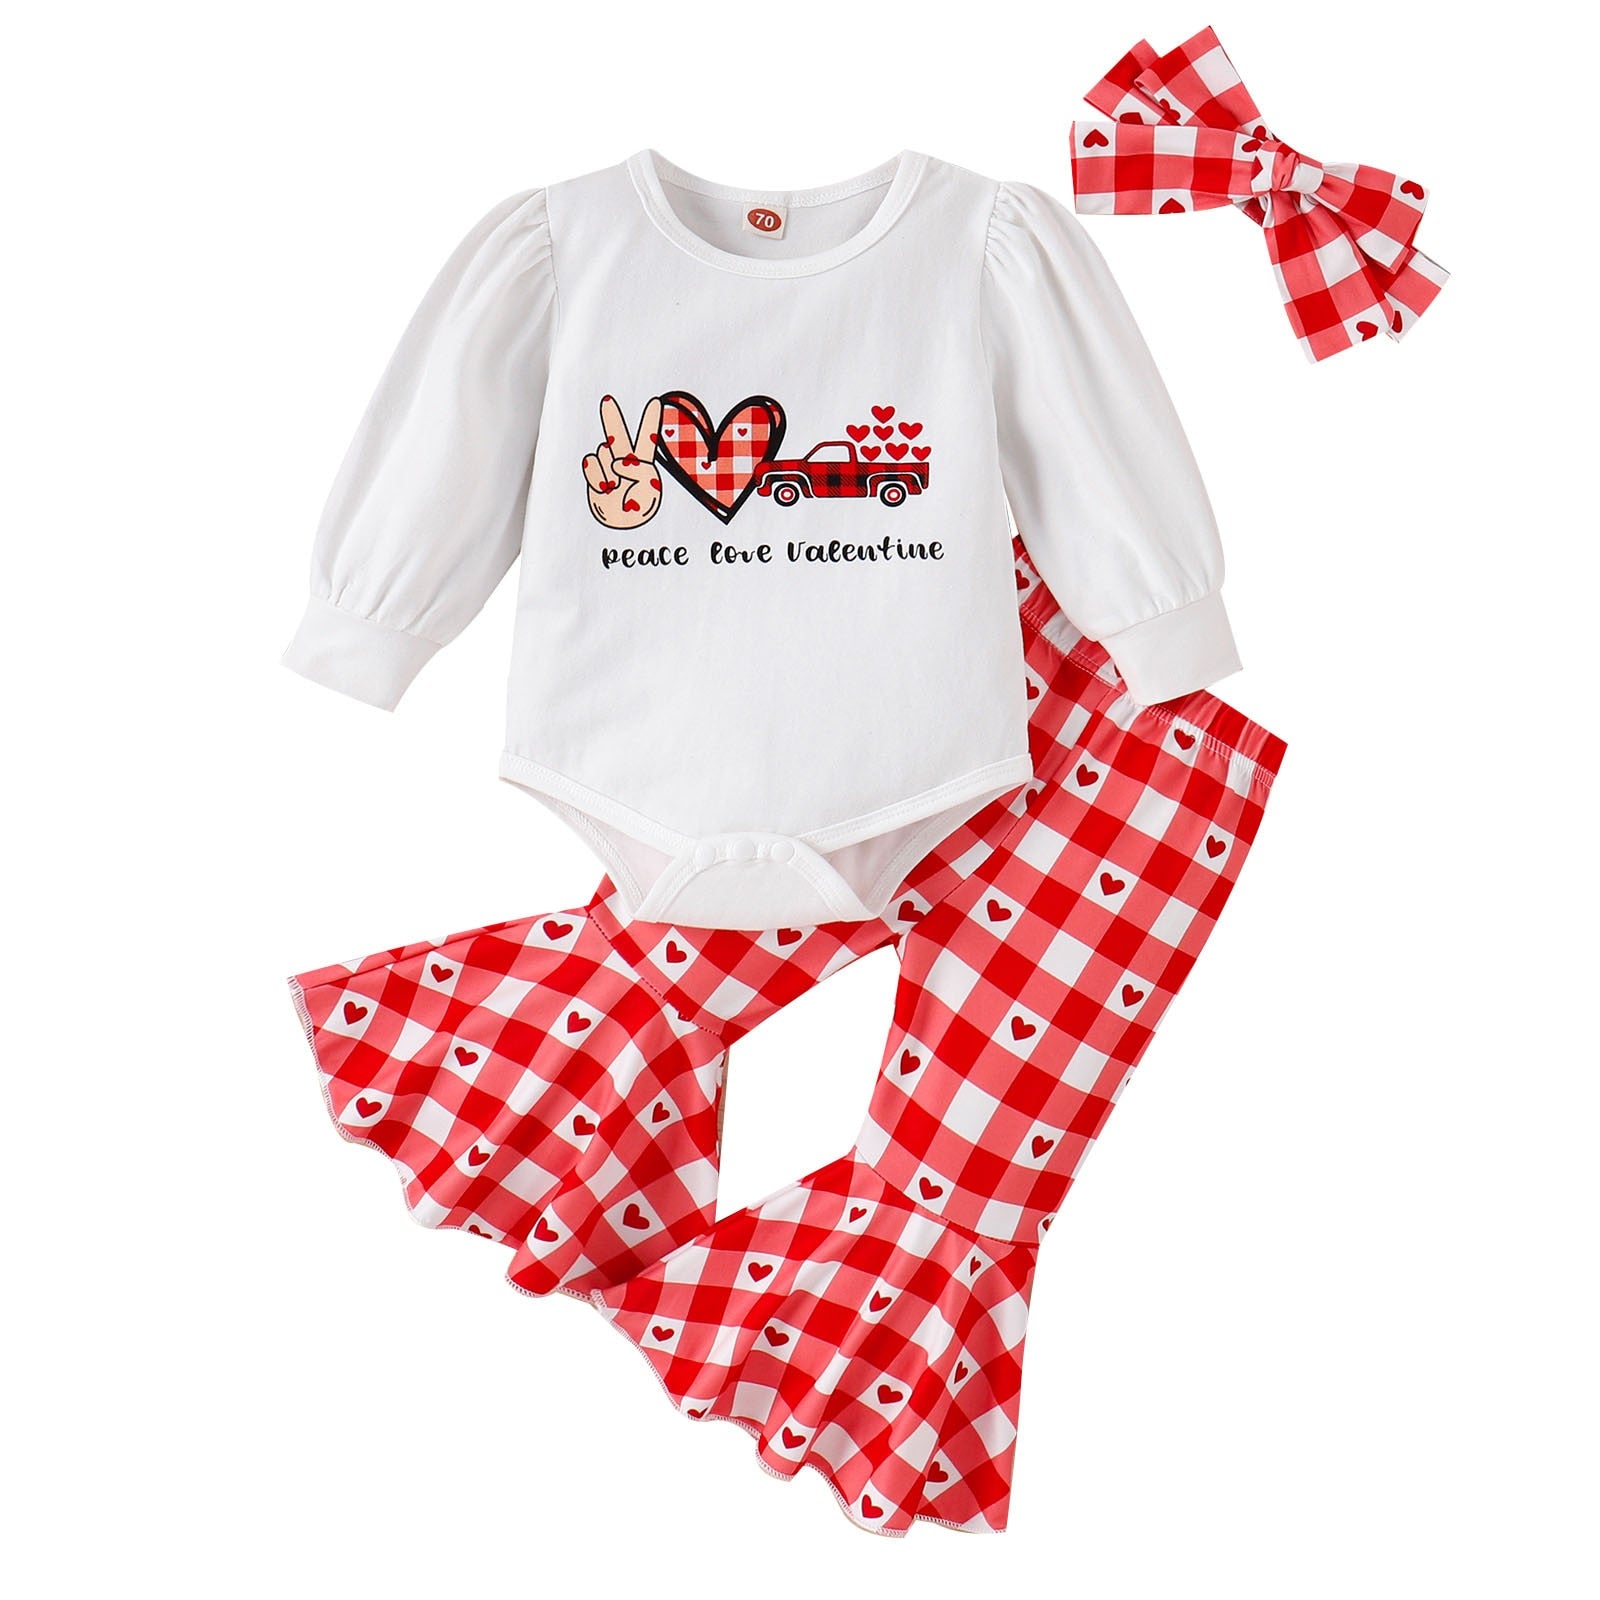 Adorable Valentine's Day Baby Girls Clothes Sets for Your Little Princess